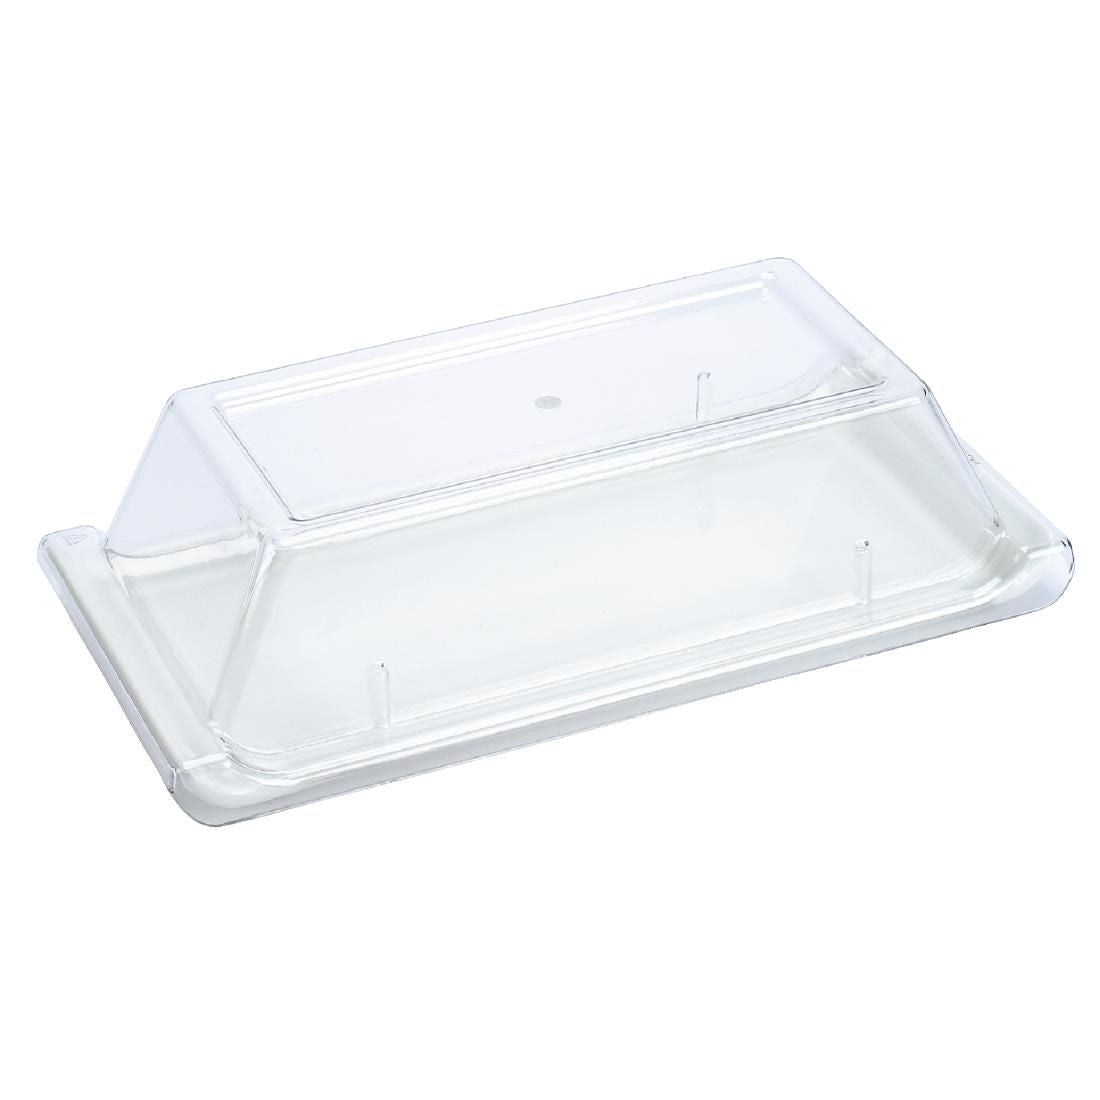 Churchill Alchemy Buffet Rectangular Tray Covers 300x 145mm (Pack of 6) JD Catering Equipment Solutions Ltd